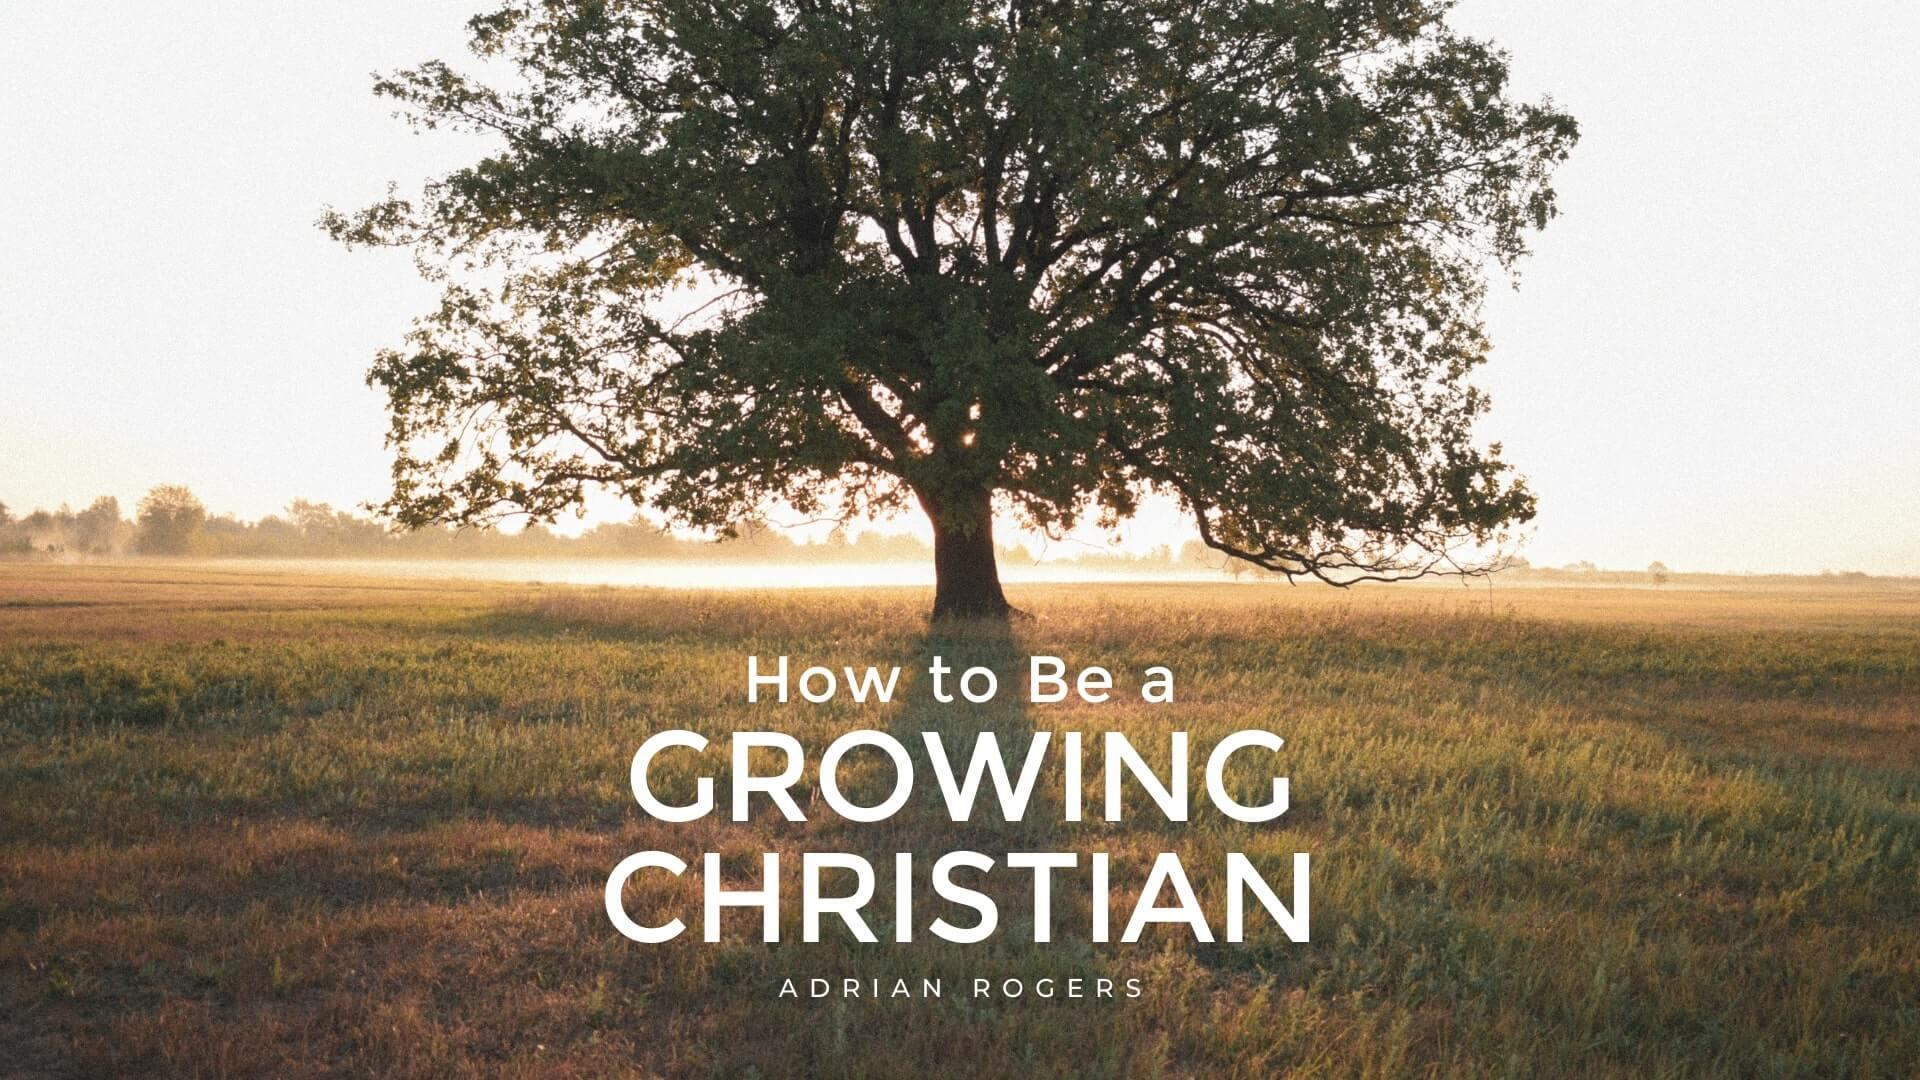 How to be a growing christian 1920x1080